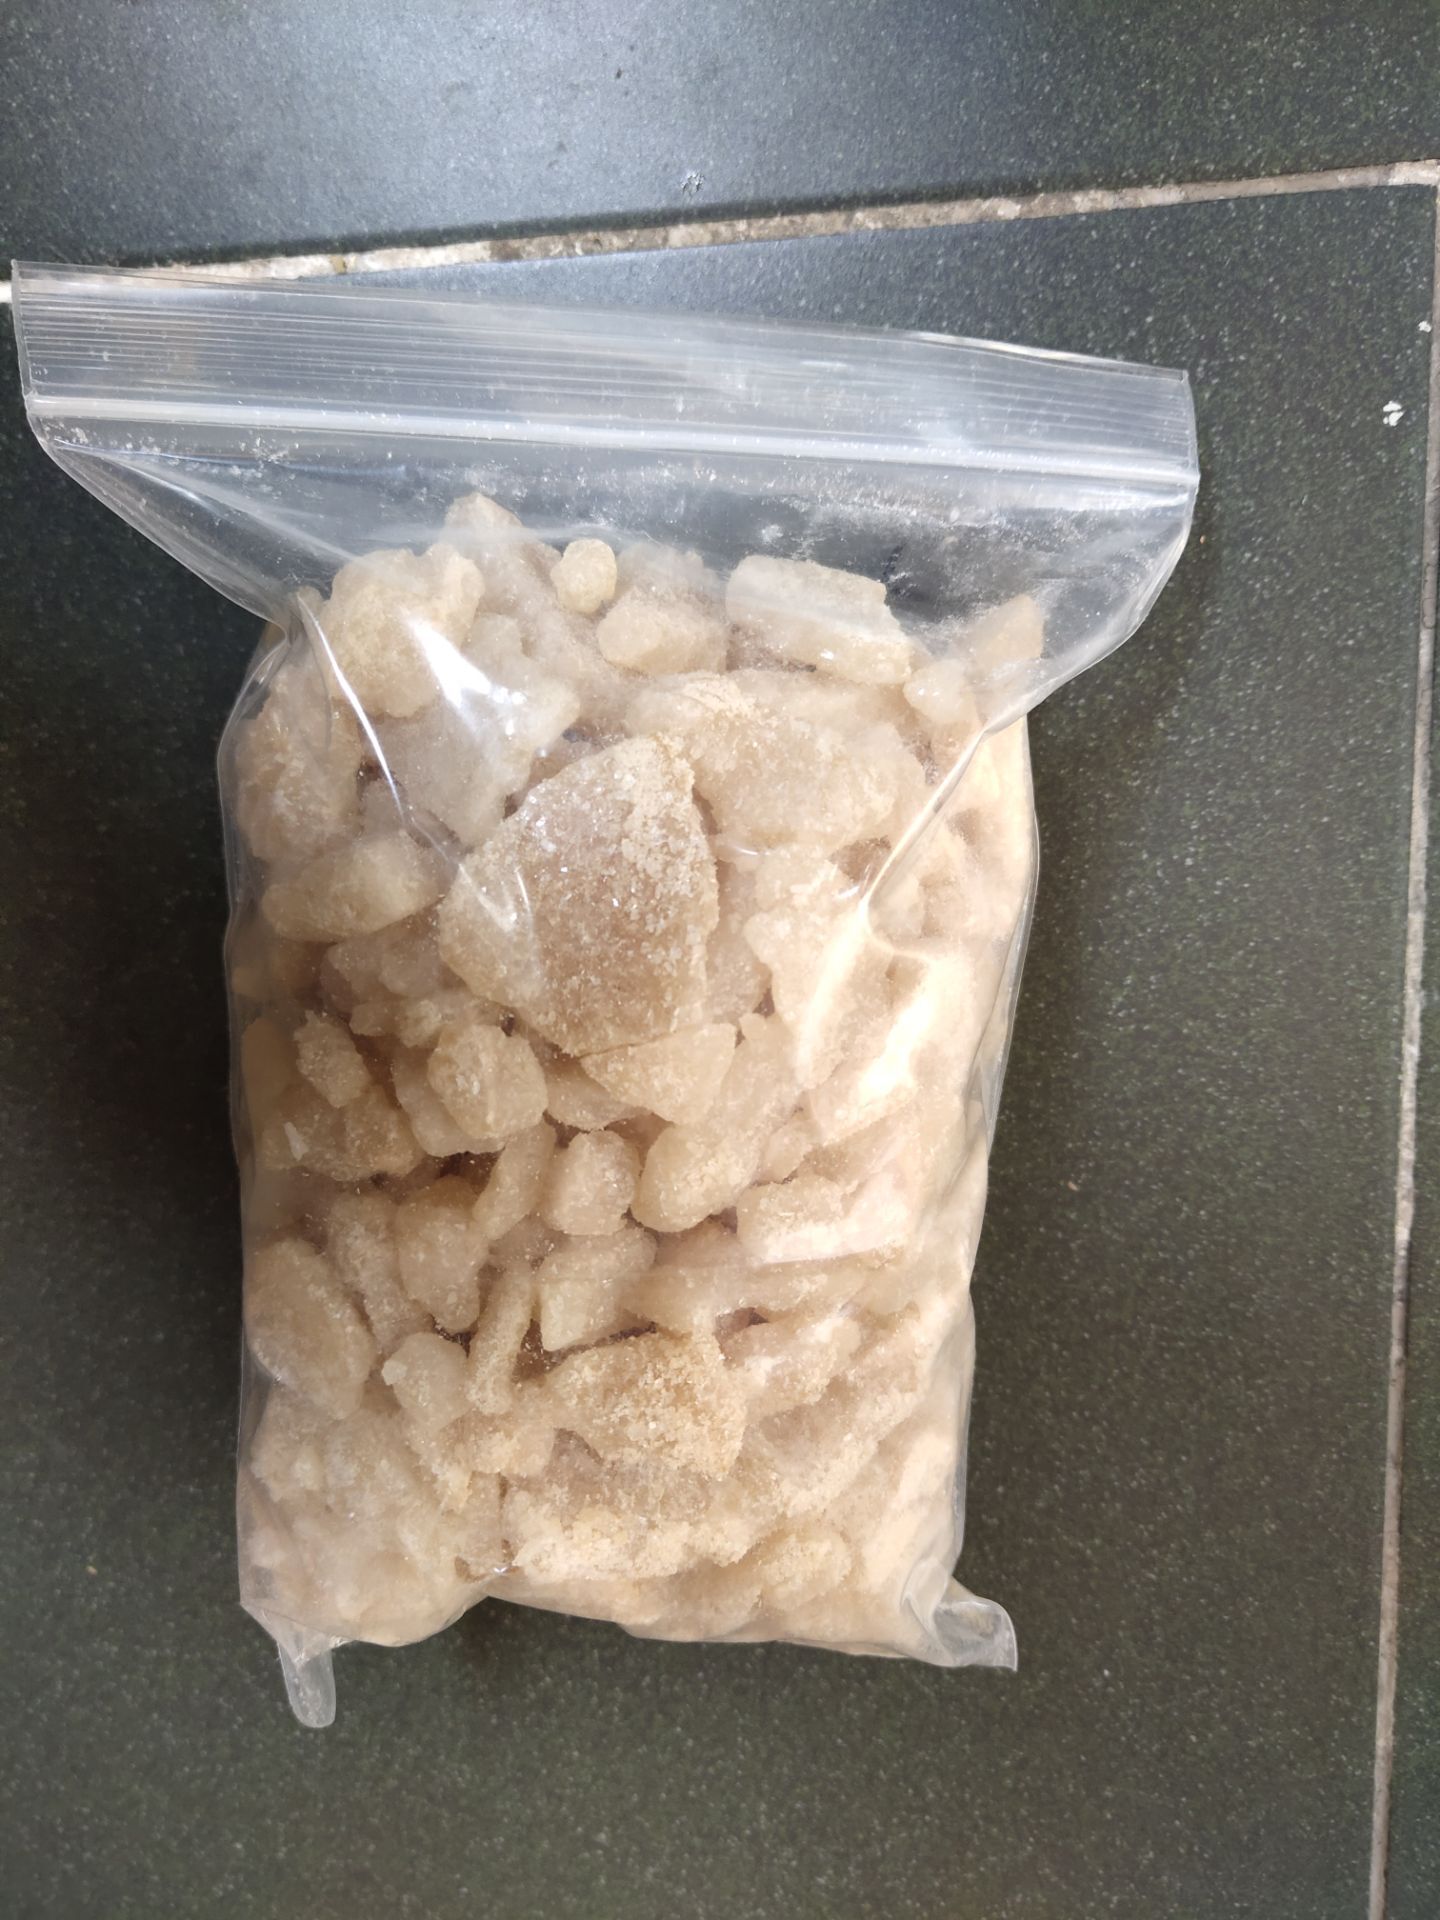 Top quality eutylone, 2fdck, 5cladba and other RCs for sale